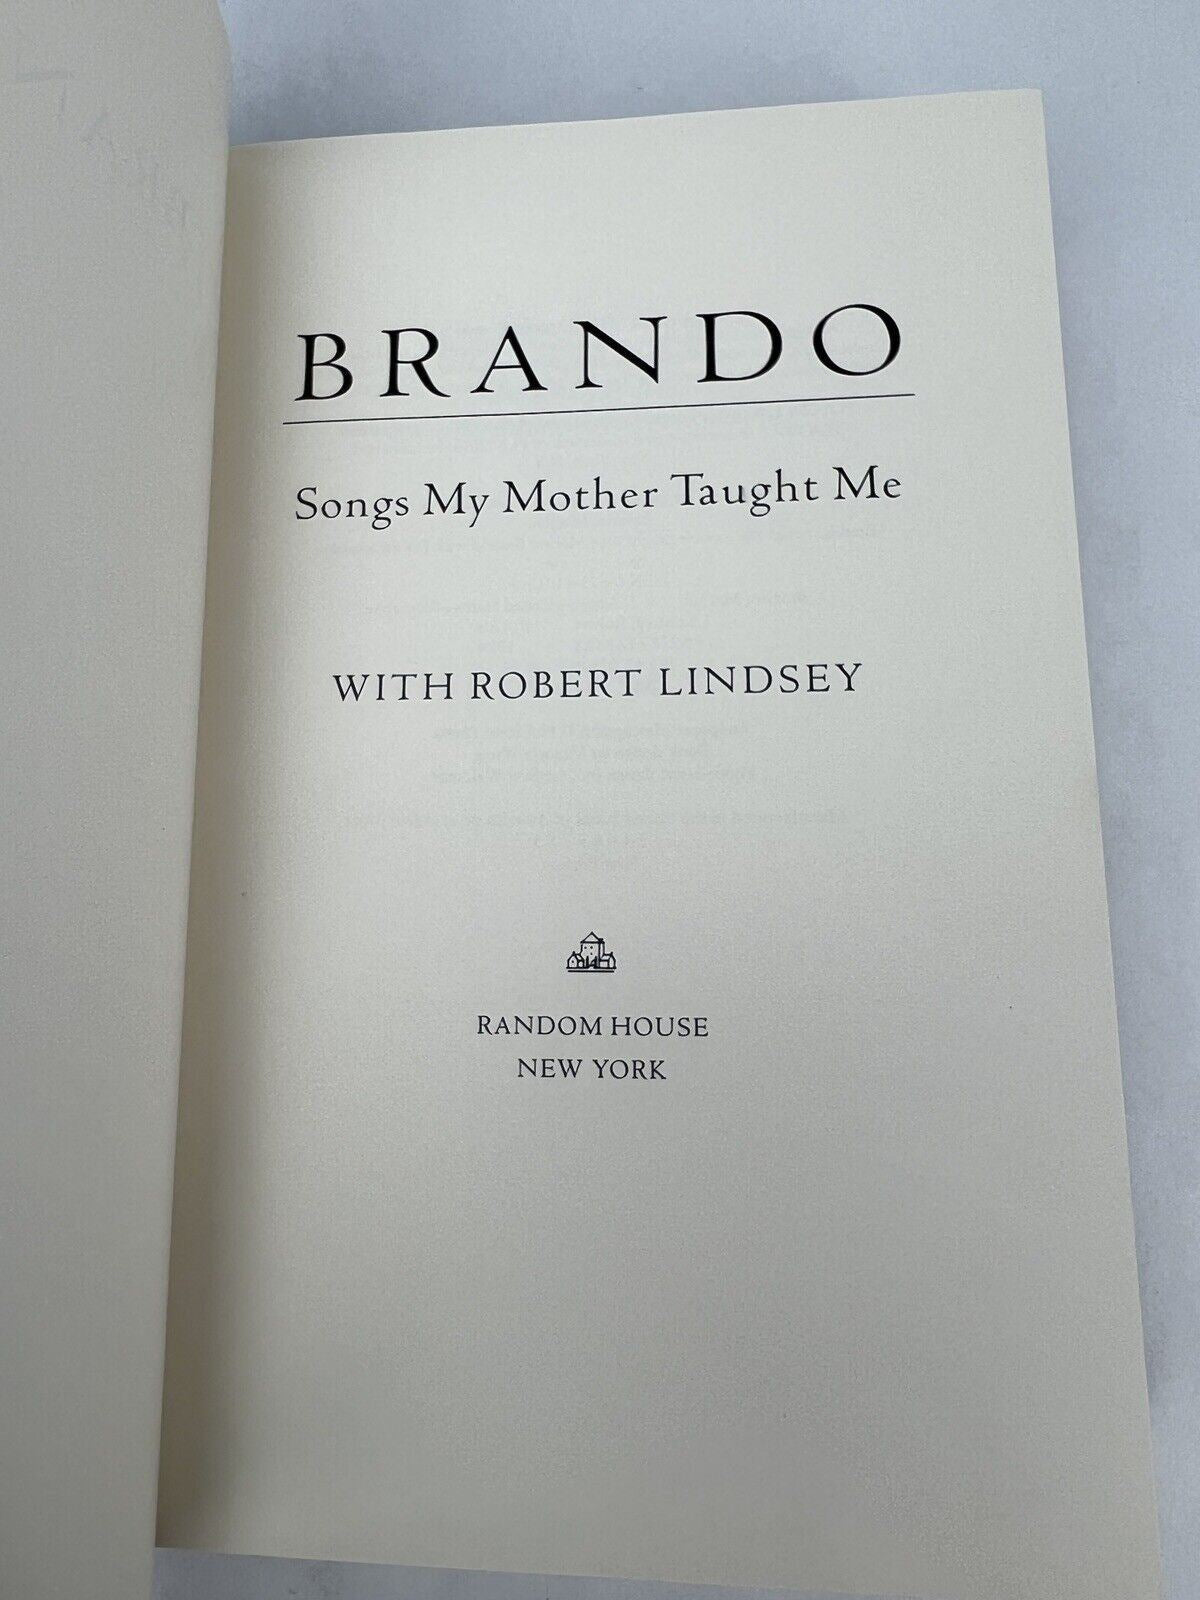 SIGNED Marlon Brando Songs My Mother Taught Me AUTOGRAPH HC Book Autobiography